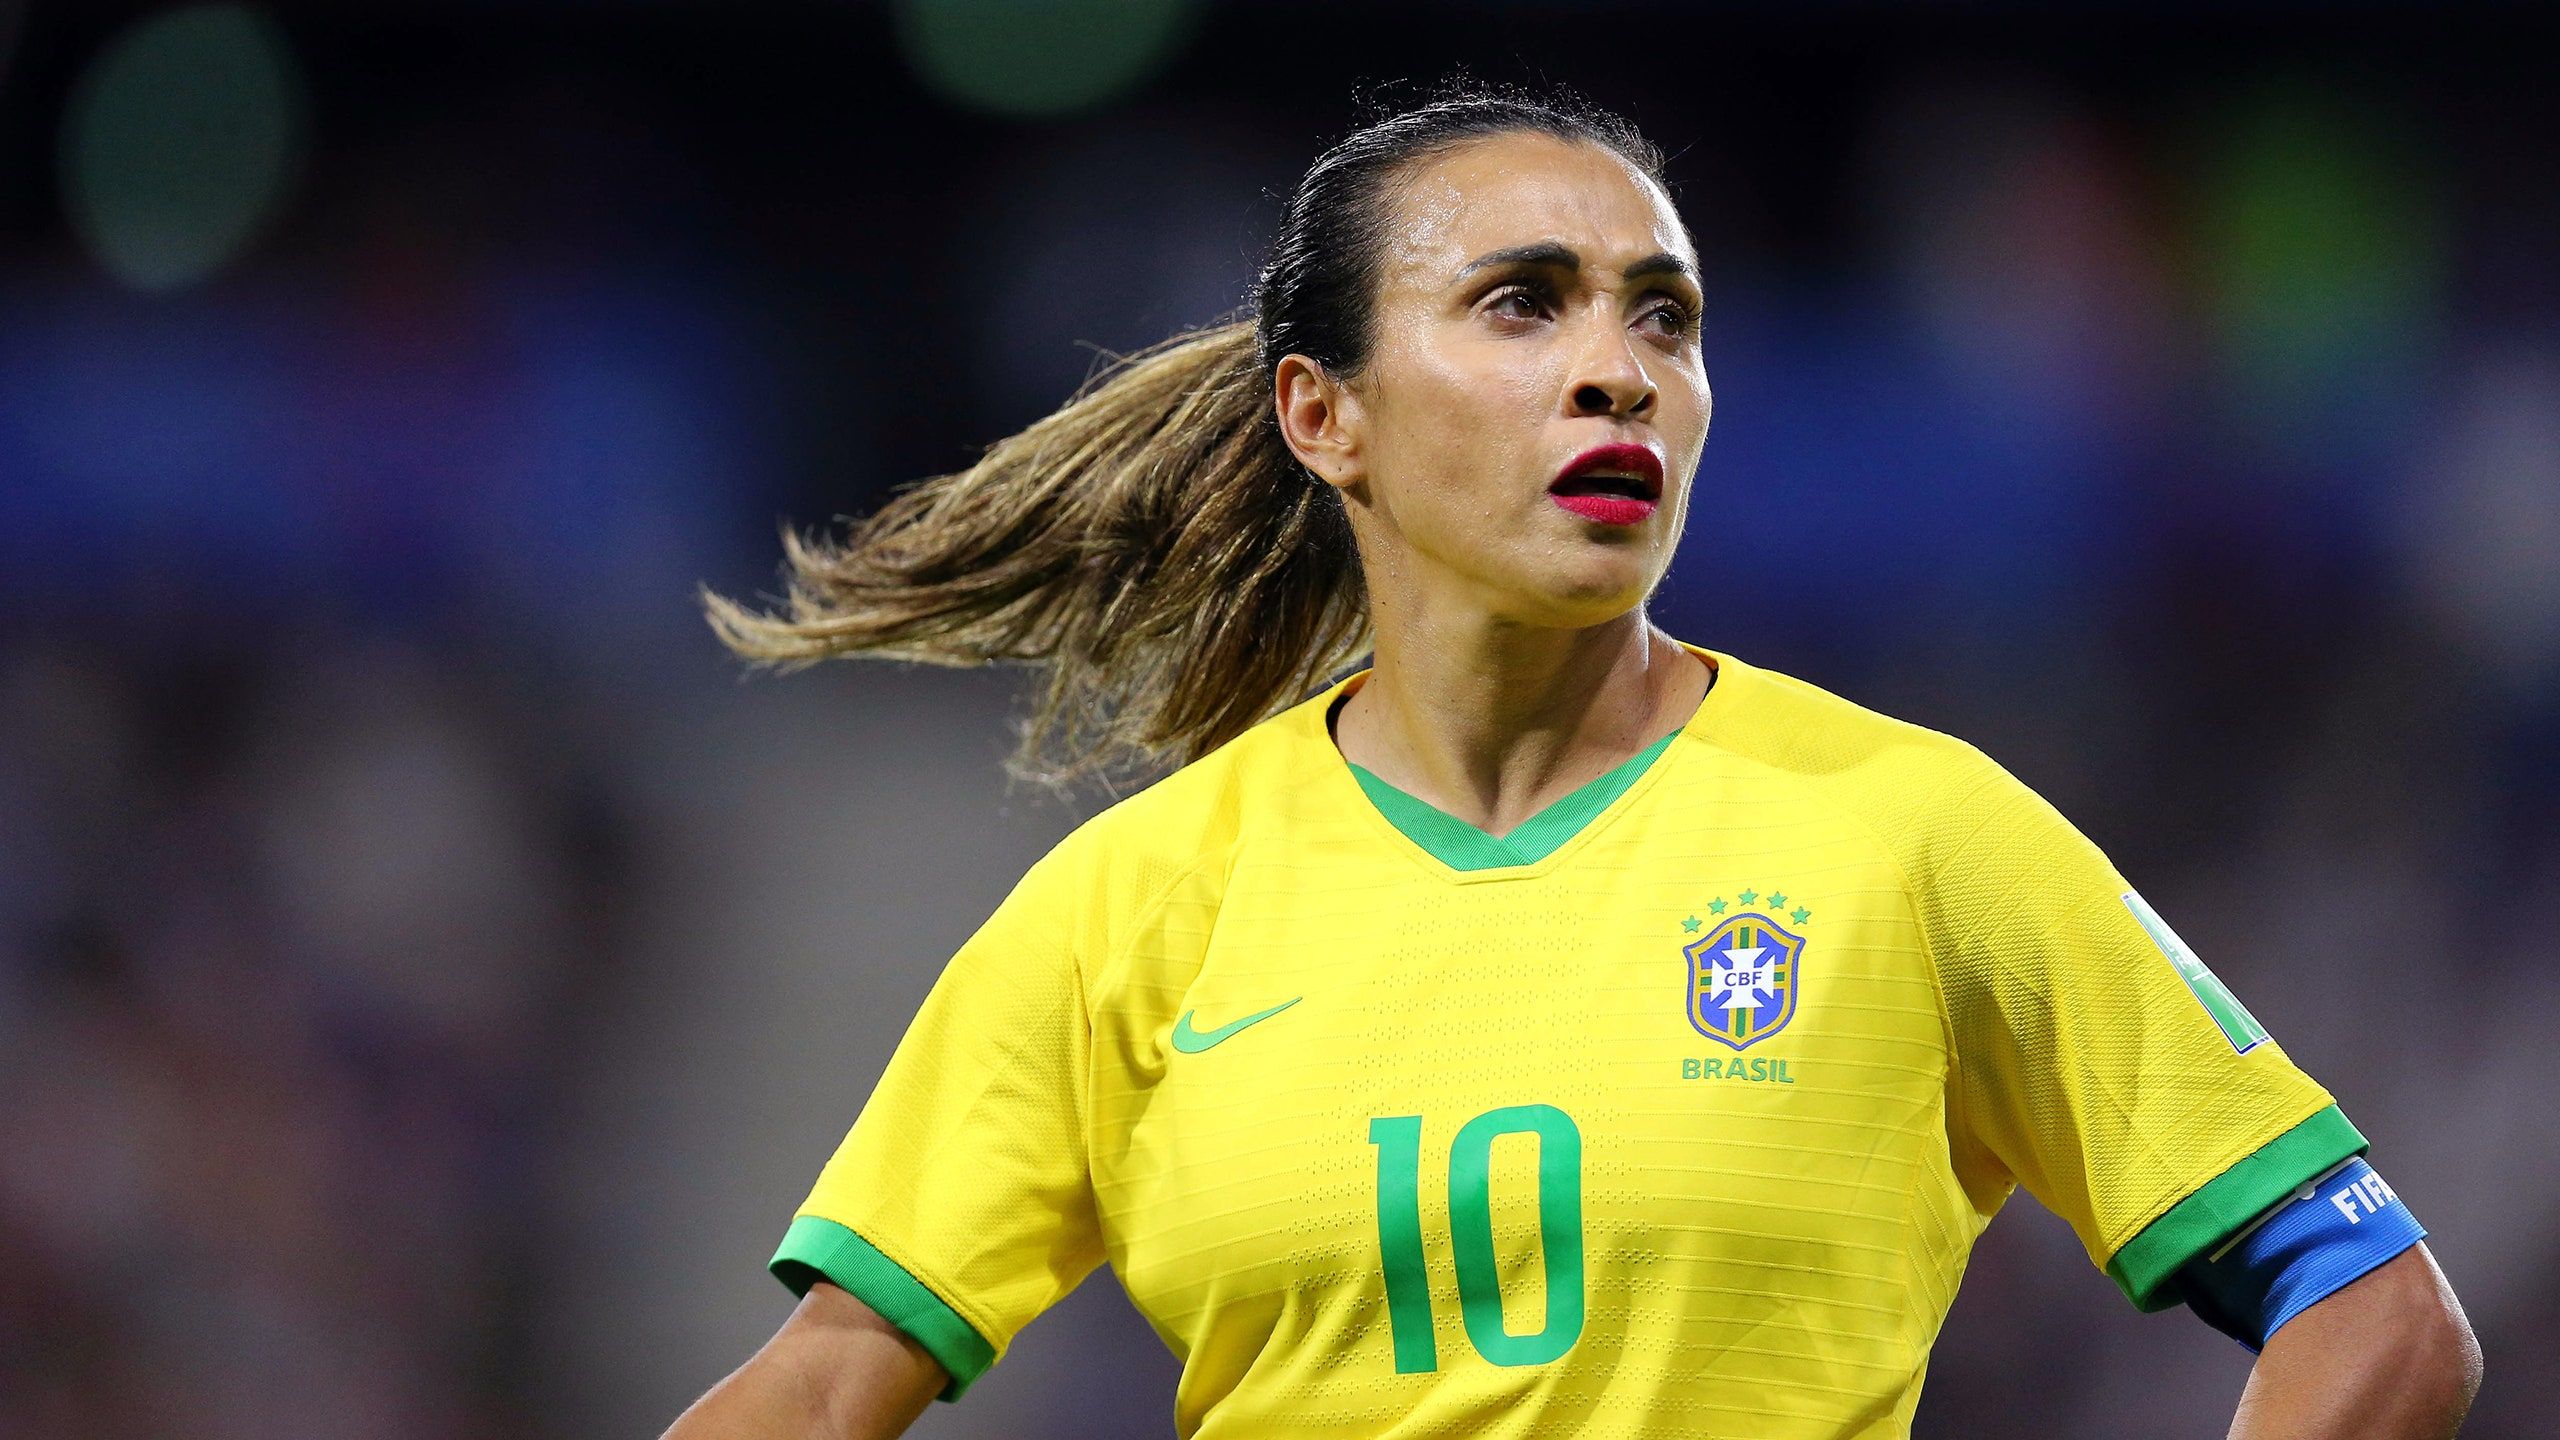 World Cup 2019: There's Not Going to Be a Marta Forever. The New Yorker